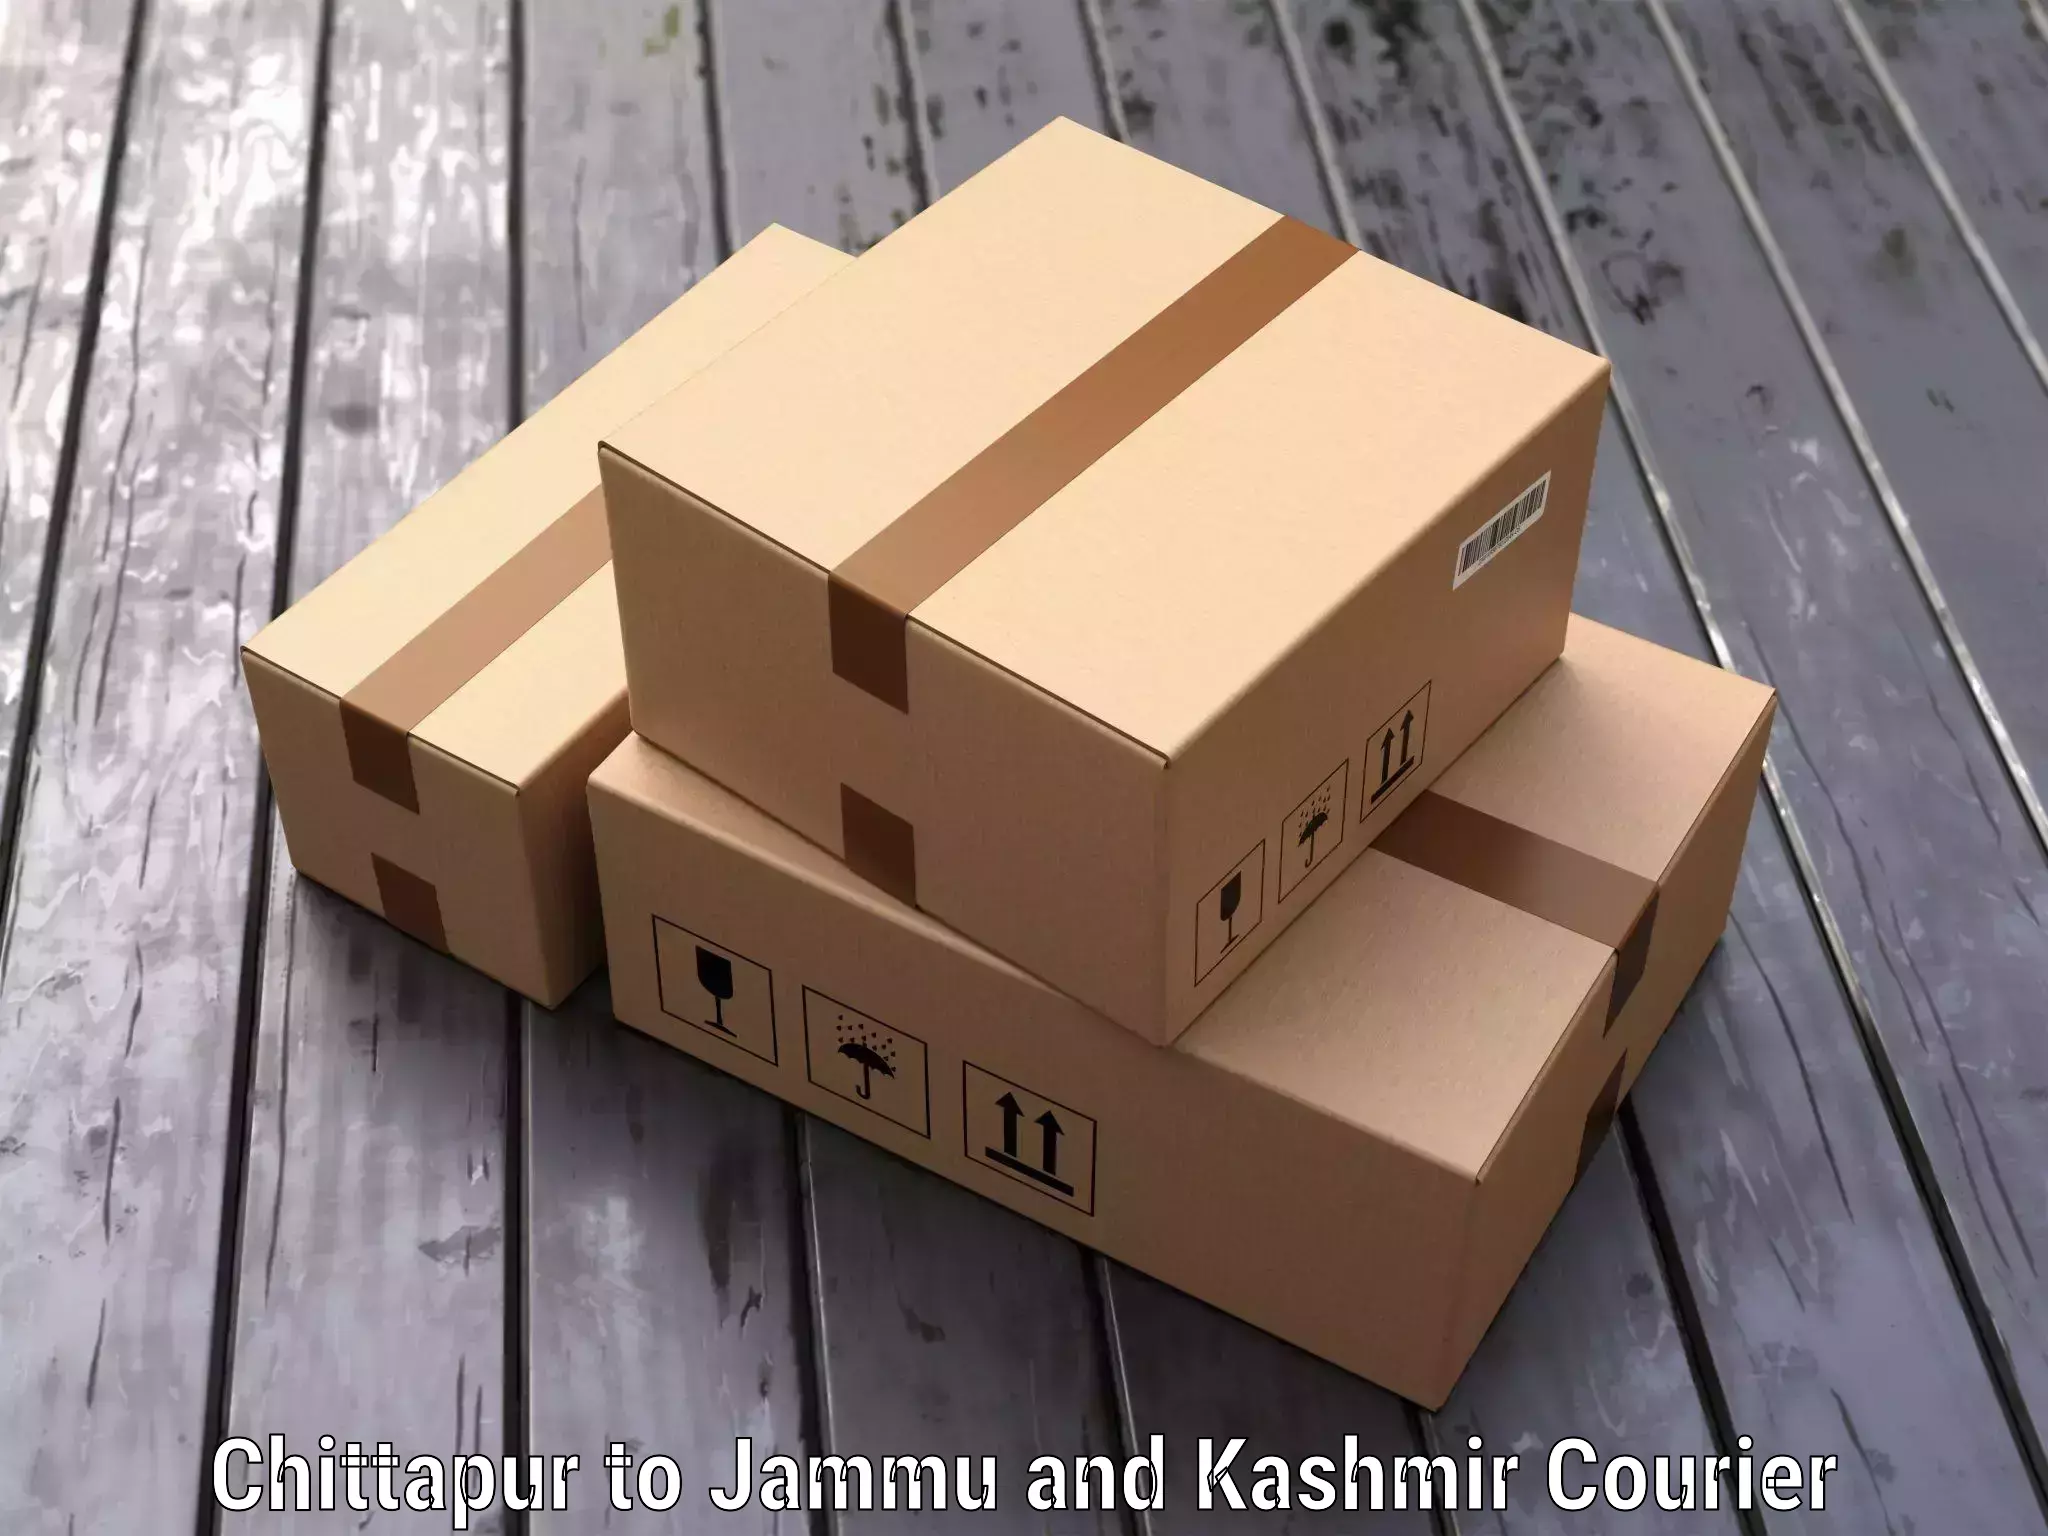 Luggage transport consultancy Chittapur to Jammu and Kashmir